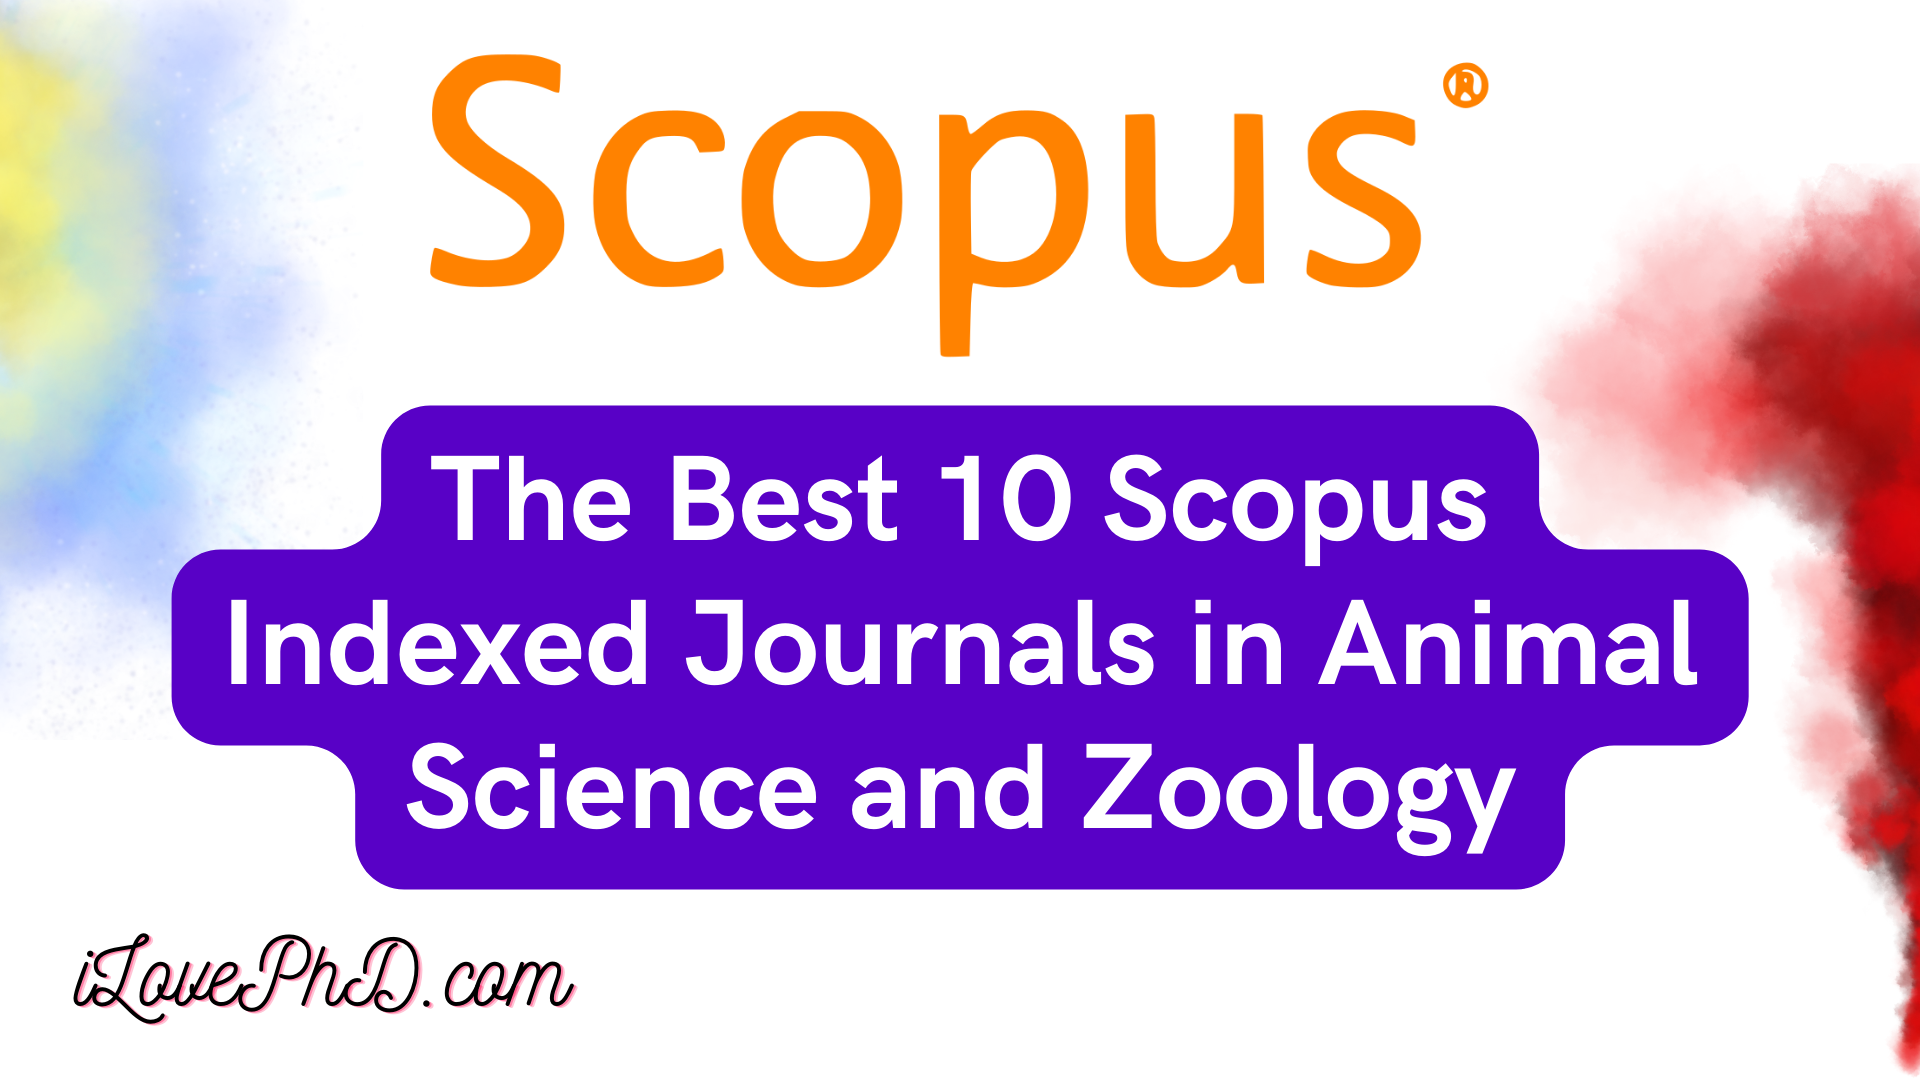 The Best 10 Scopus Indexed Journals in Animal Science and Zoology - iLovePhD